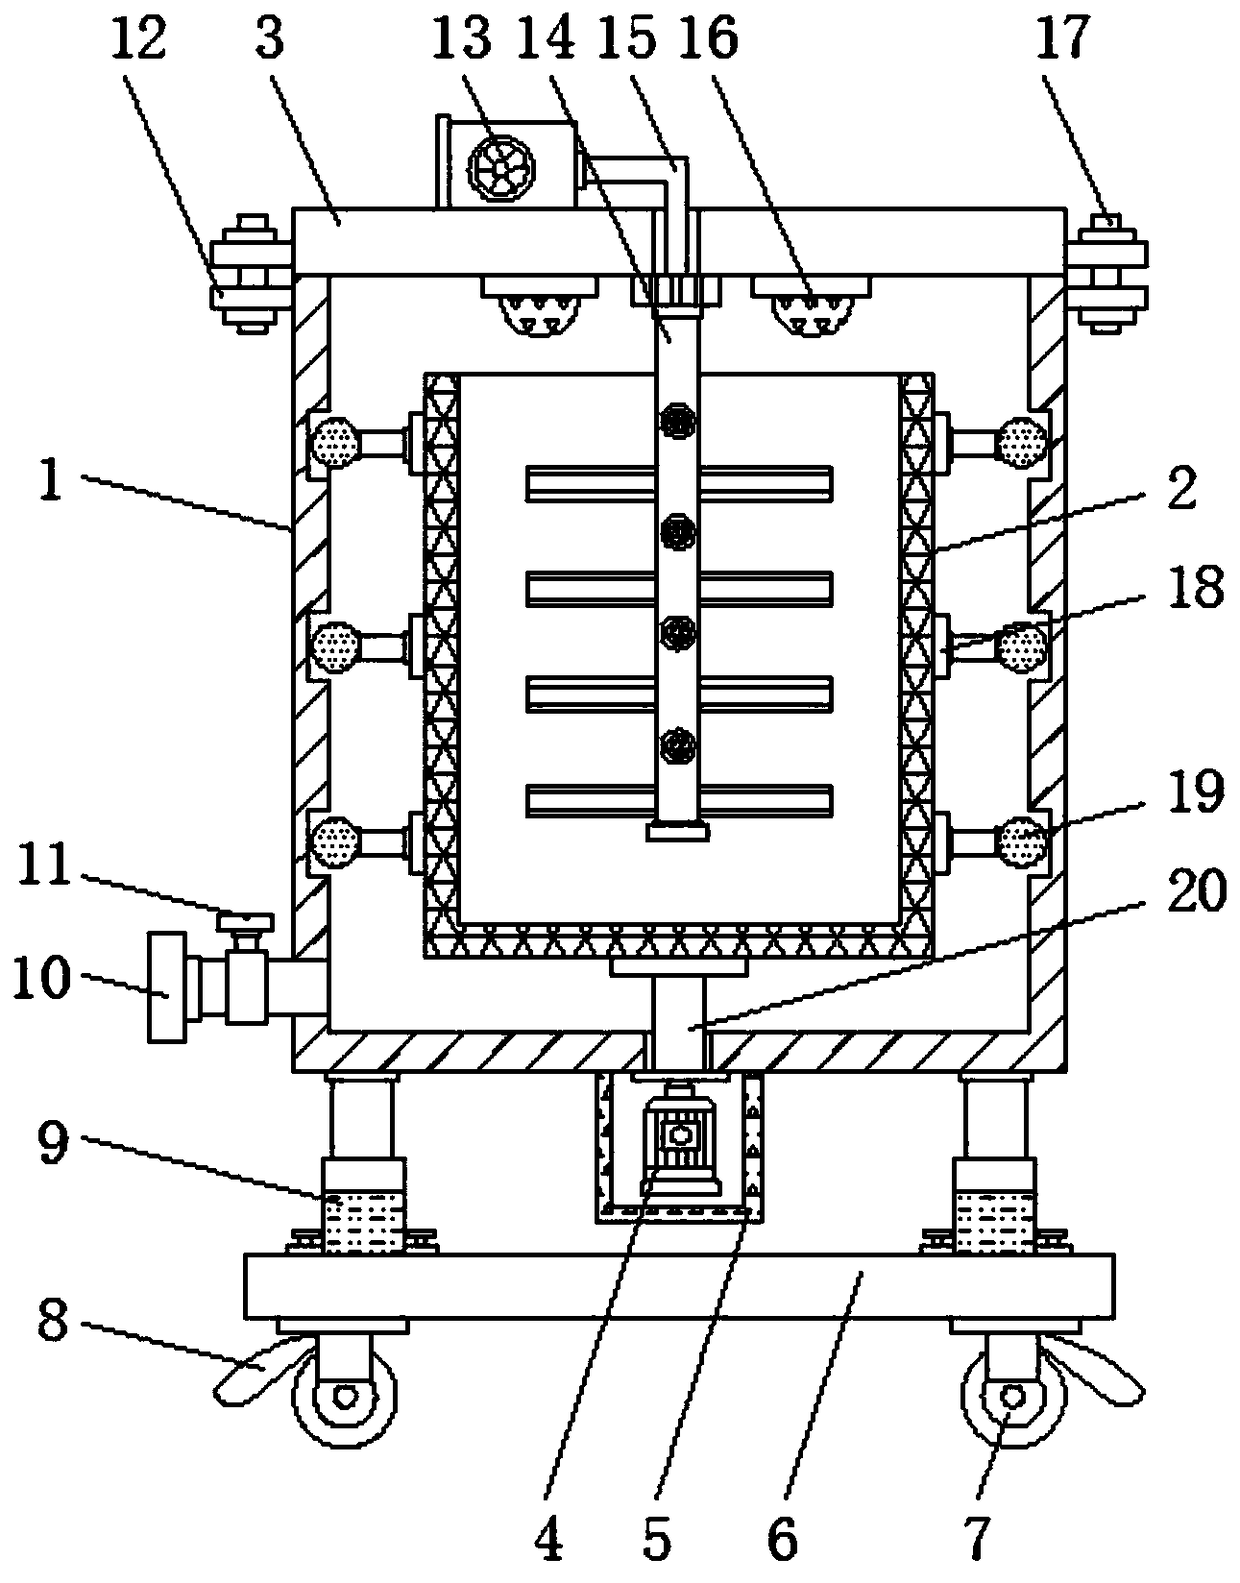 Dehydrating and drying device for vegetable processing